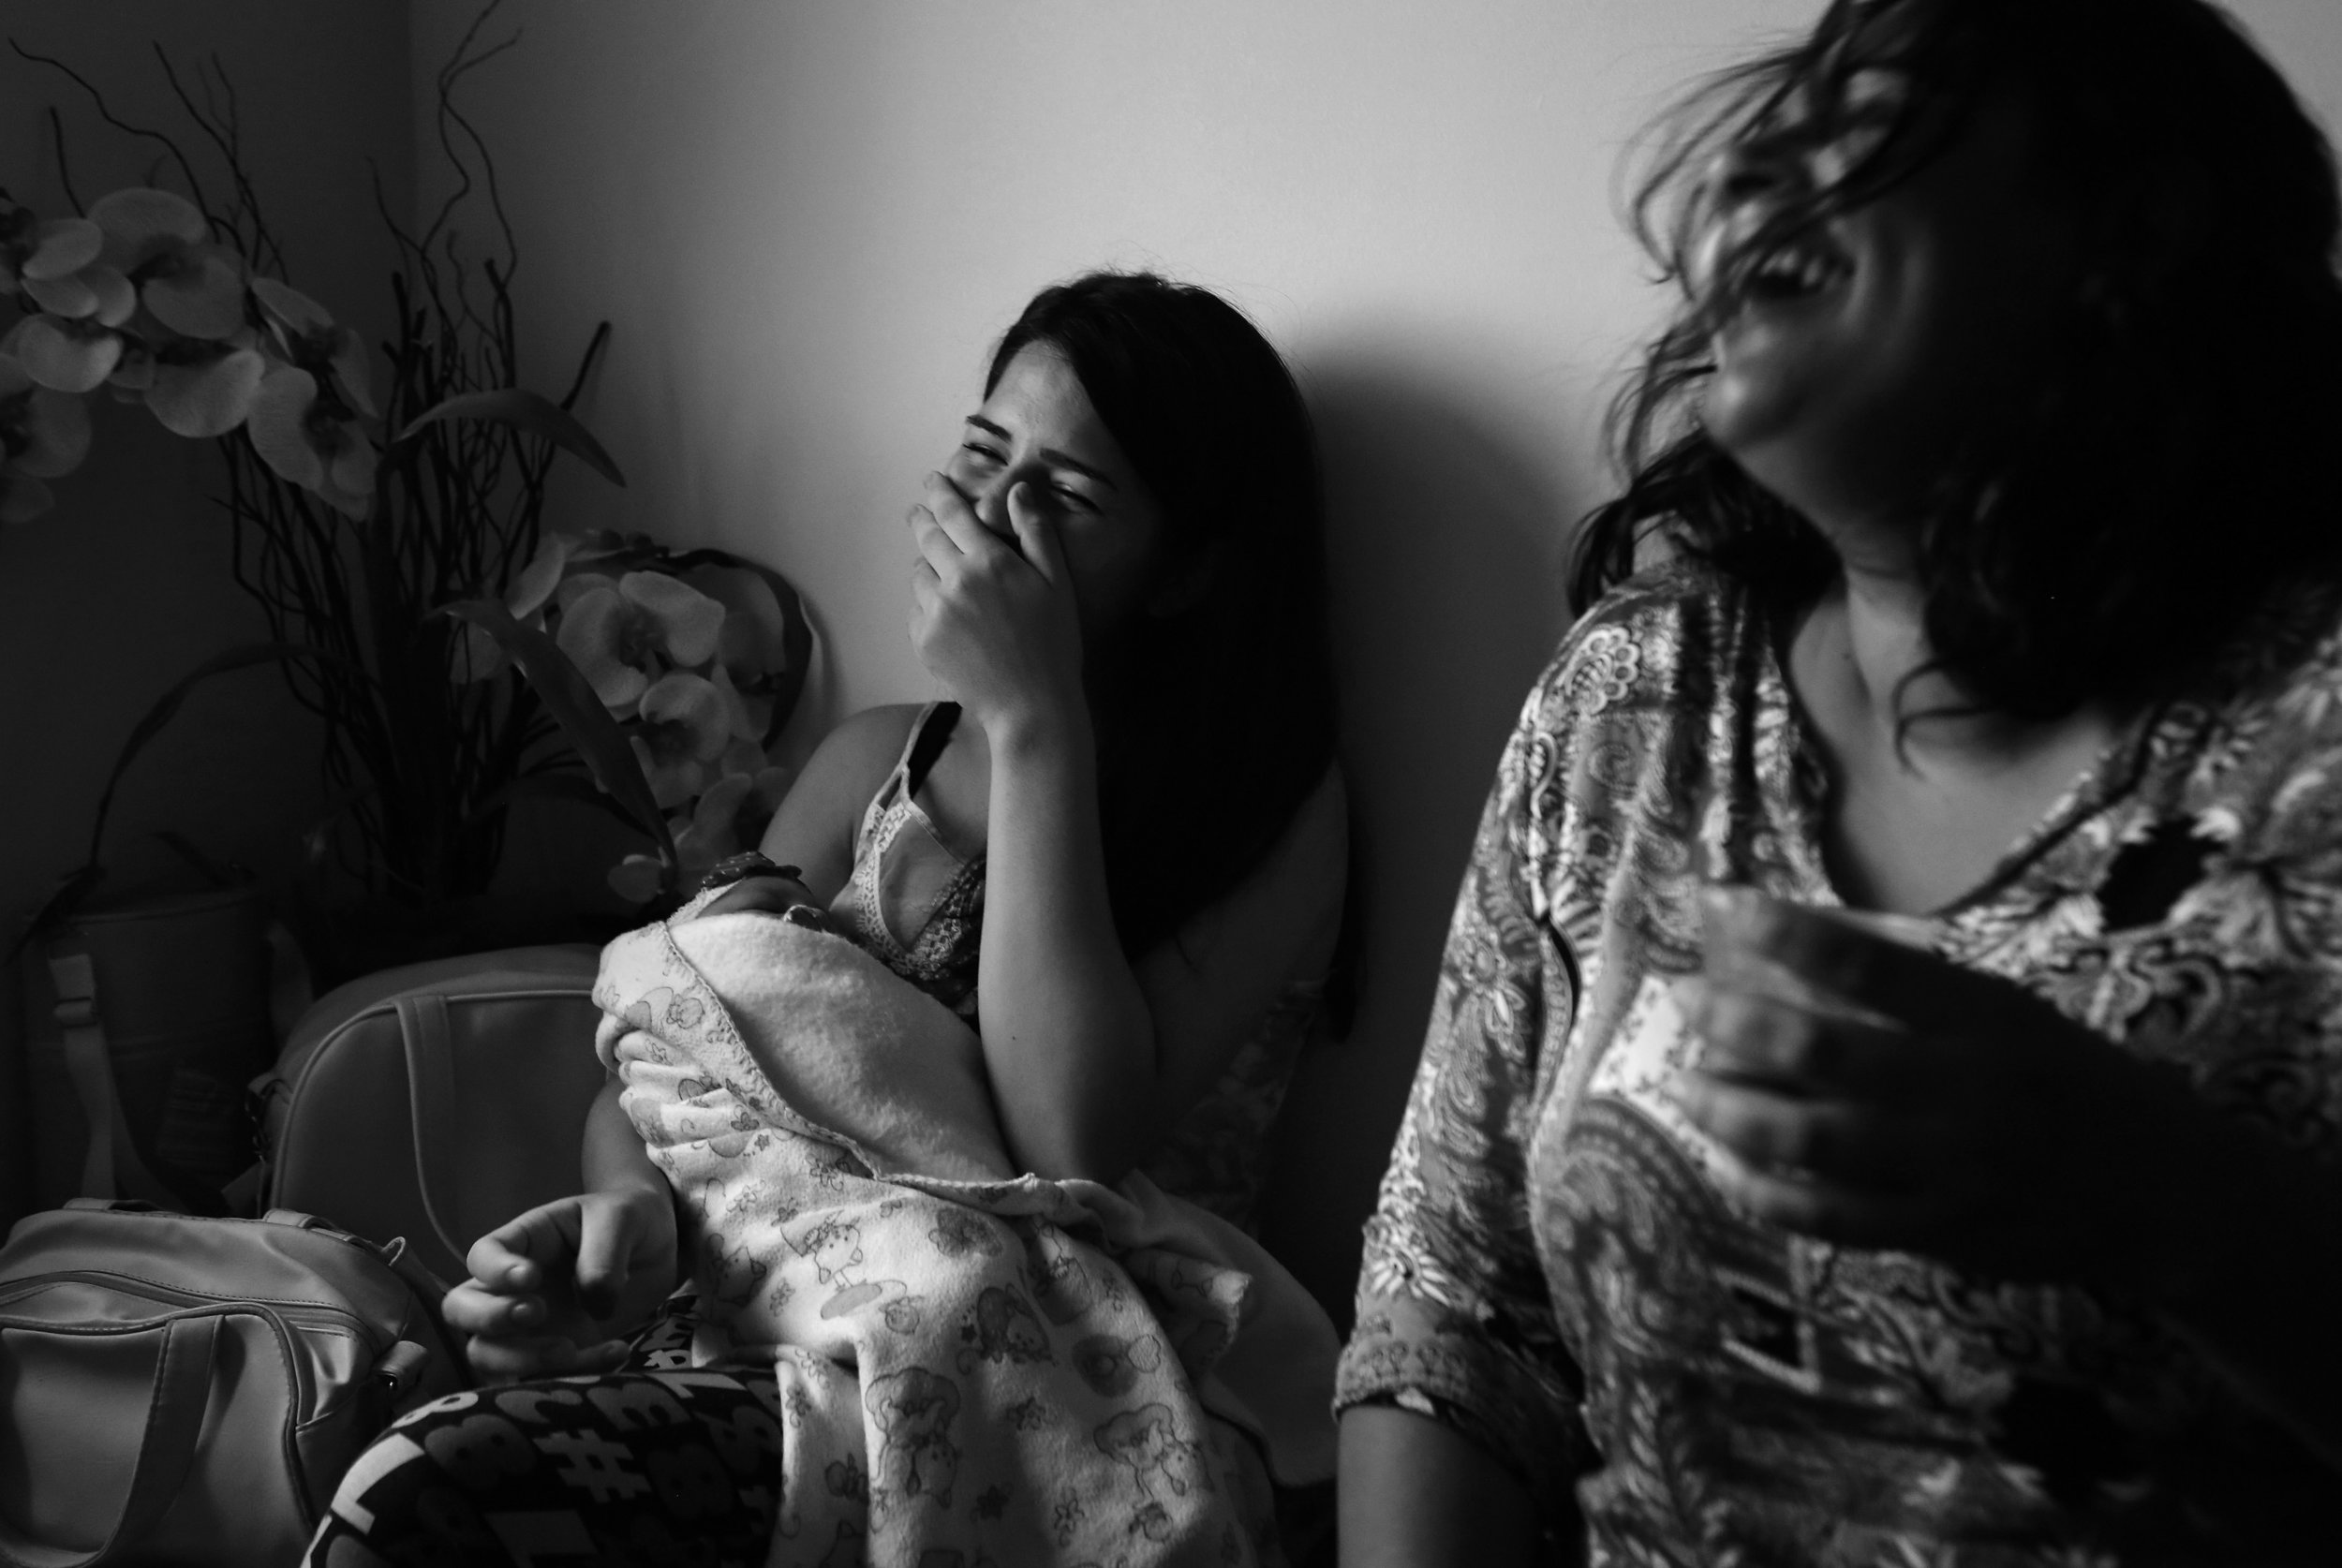  Ianka Barbosa, age 18, left, shares a laugh with Maria da Silva, as they wait for their babies’ physiotherapy appointments at the Pedro 1 Municipal Hospital. The hospital is more than a treatment center: It has become a refuge for families, a place 